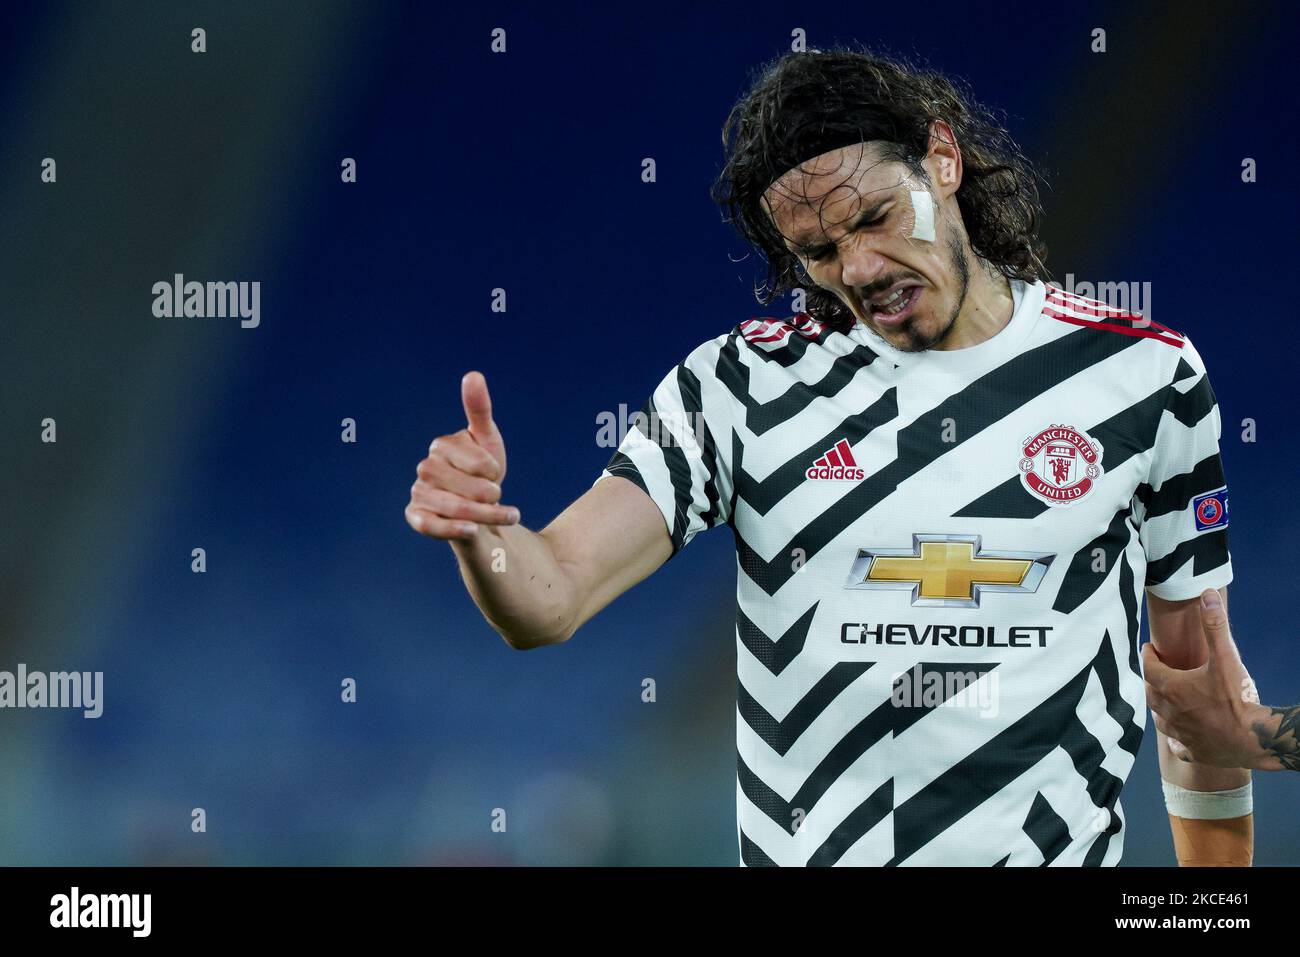 Edinson Cavani of Manchester United gestures during the UEFA Europa League Semi-Final match between AS Roma and Manchester United at Stadio Olimpico, Rome, Italy on 6 May 2021. (Photo by Giuseppe Maffia/NurPhoto) Stock Photo